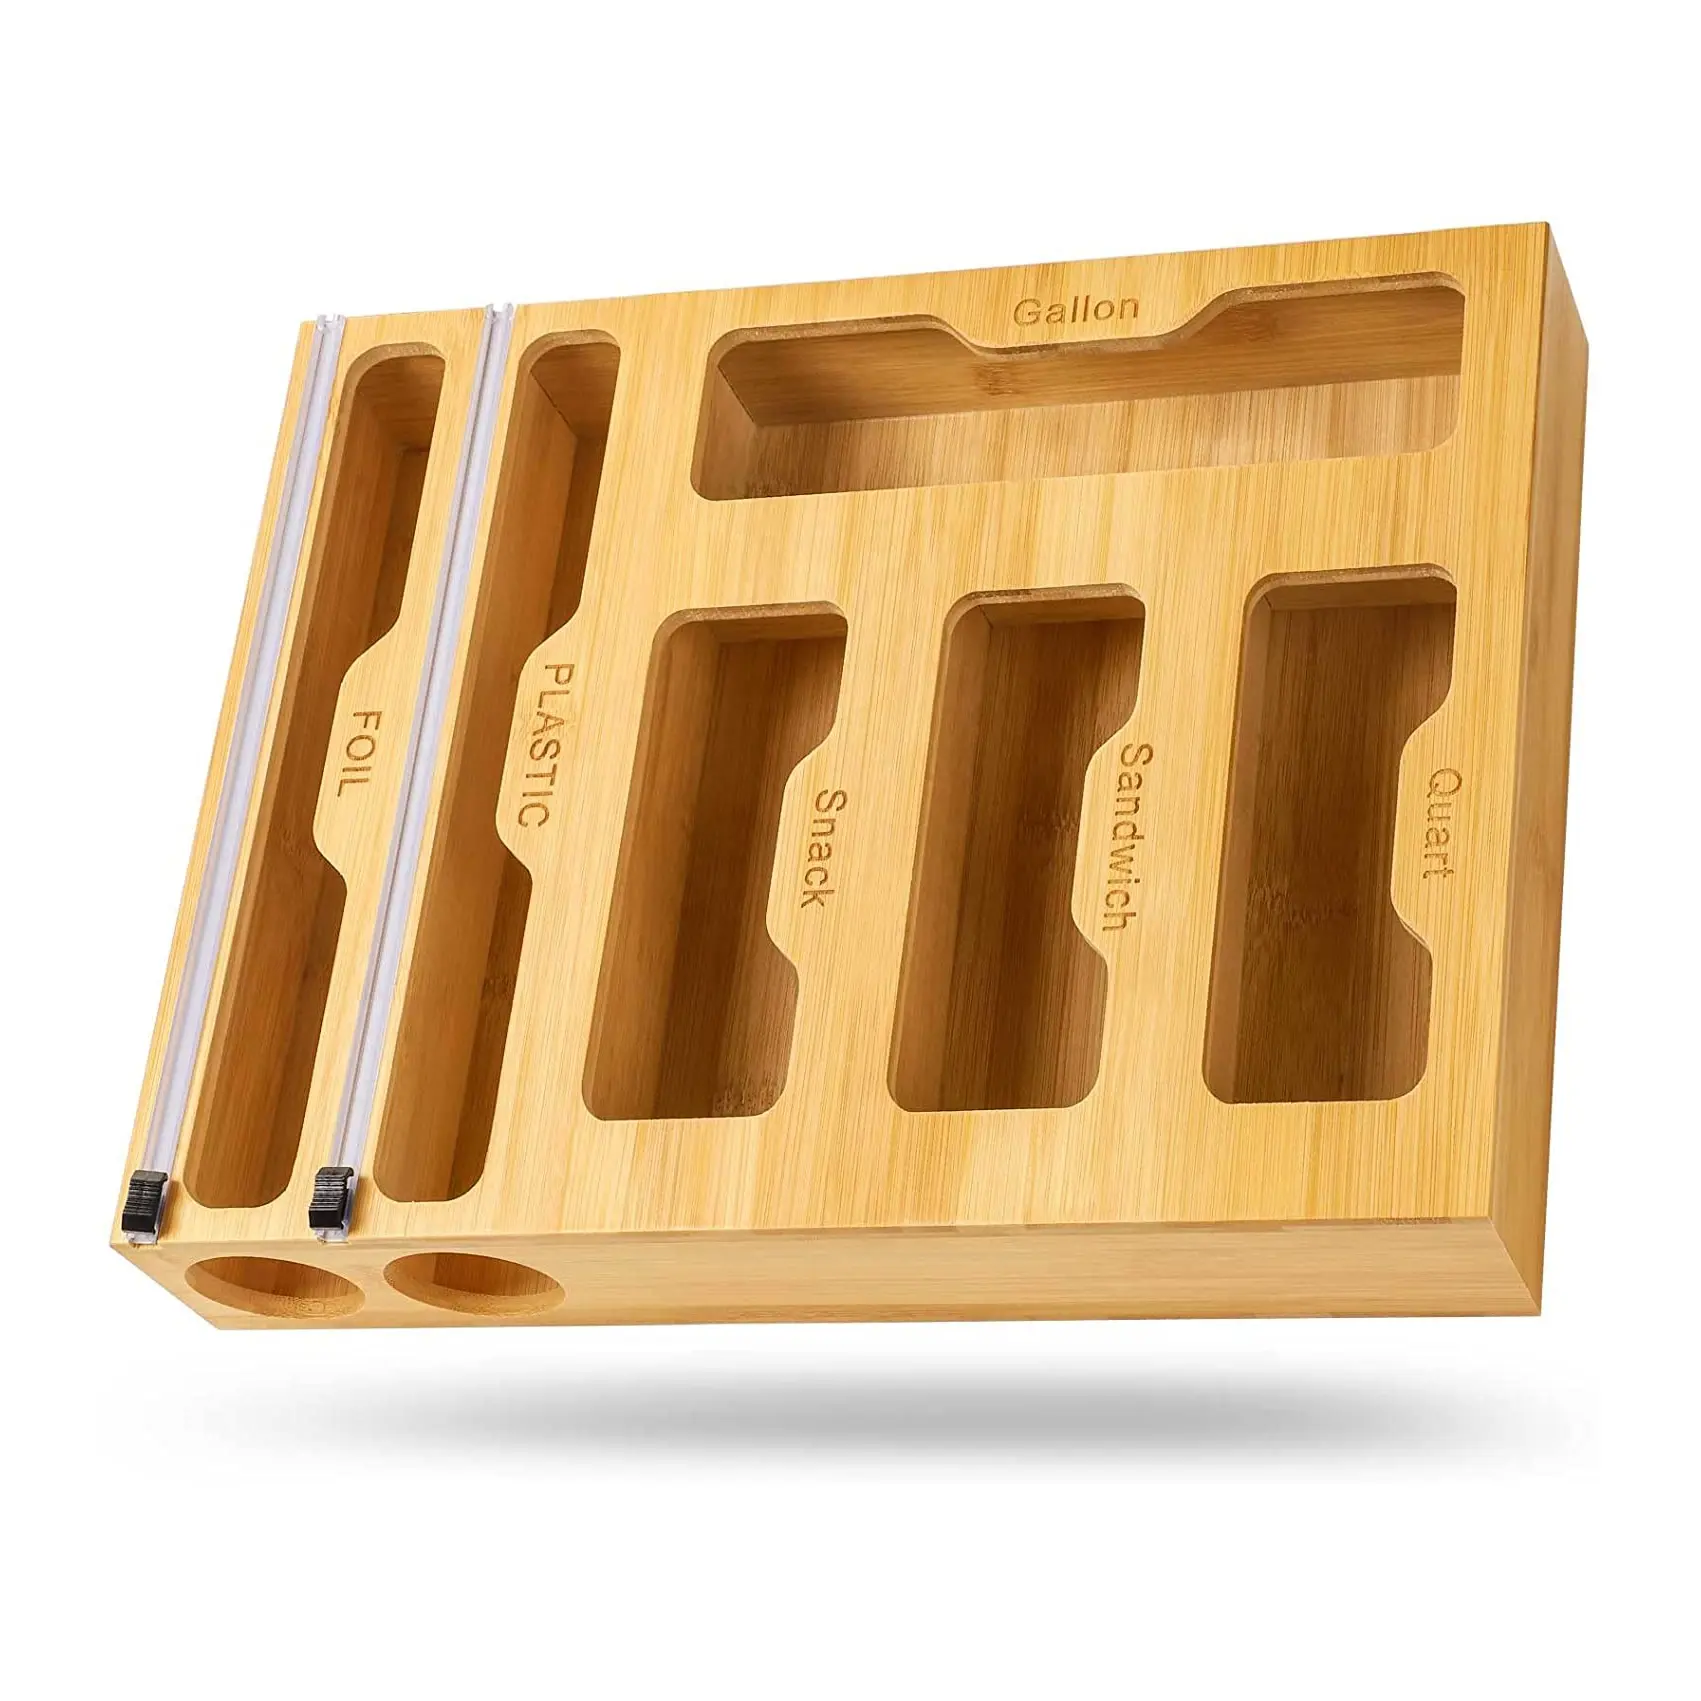 Amazon Top Seller Customized Bamboo Ziplock Bag Storage Organizer and Dispenser for Kitchen Drawer with Variety Size